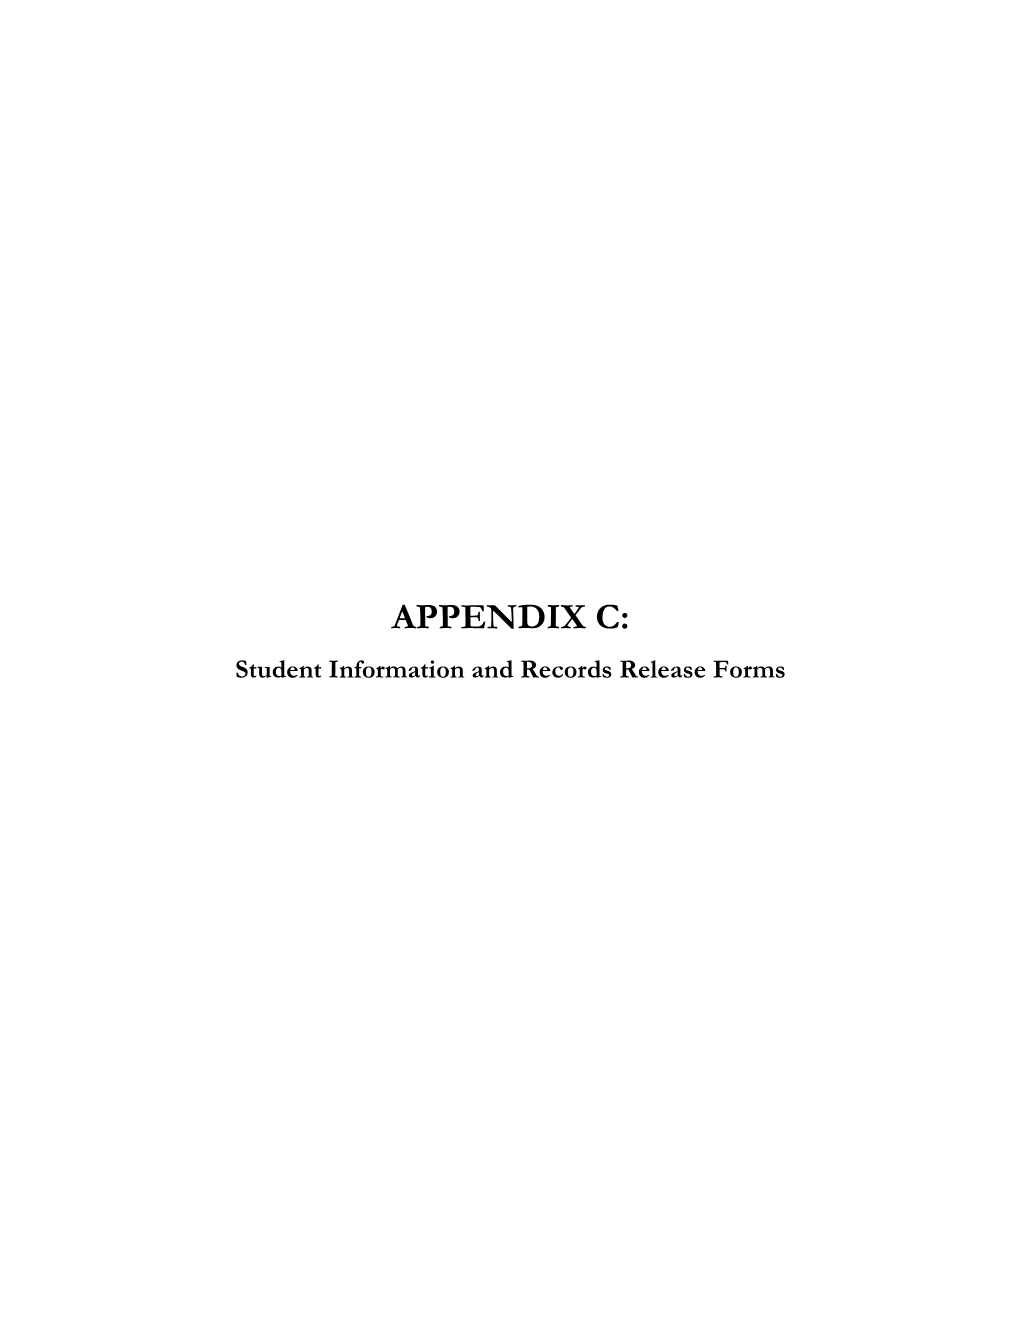 APPENDIX C: Student Information and Records Release Forms